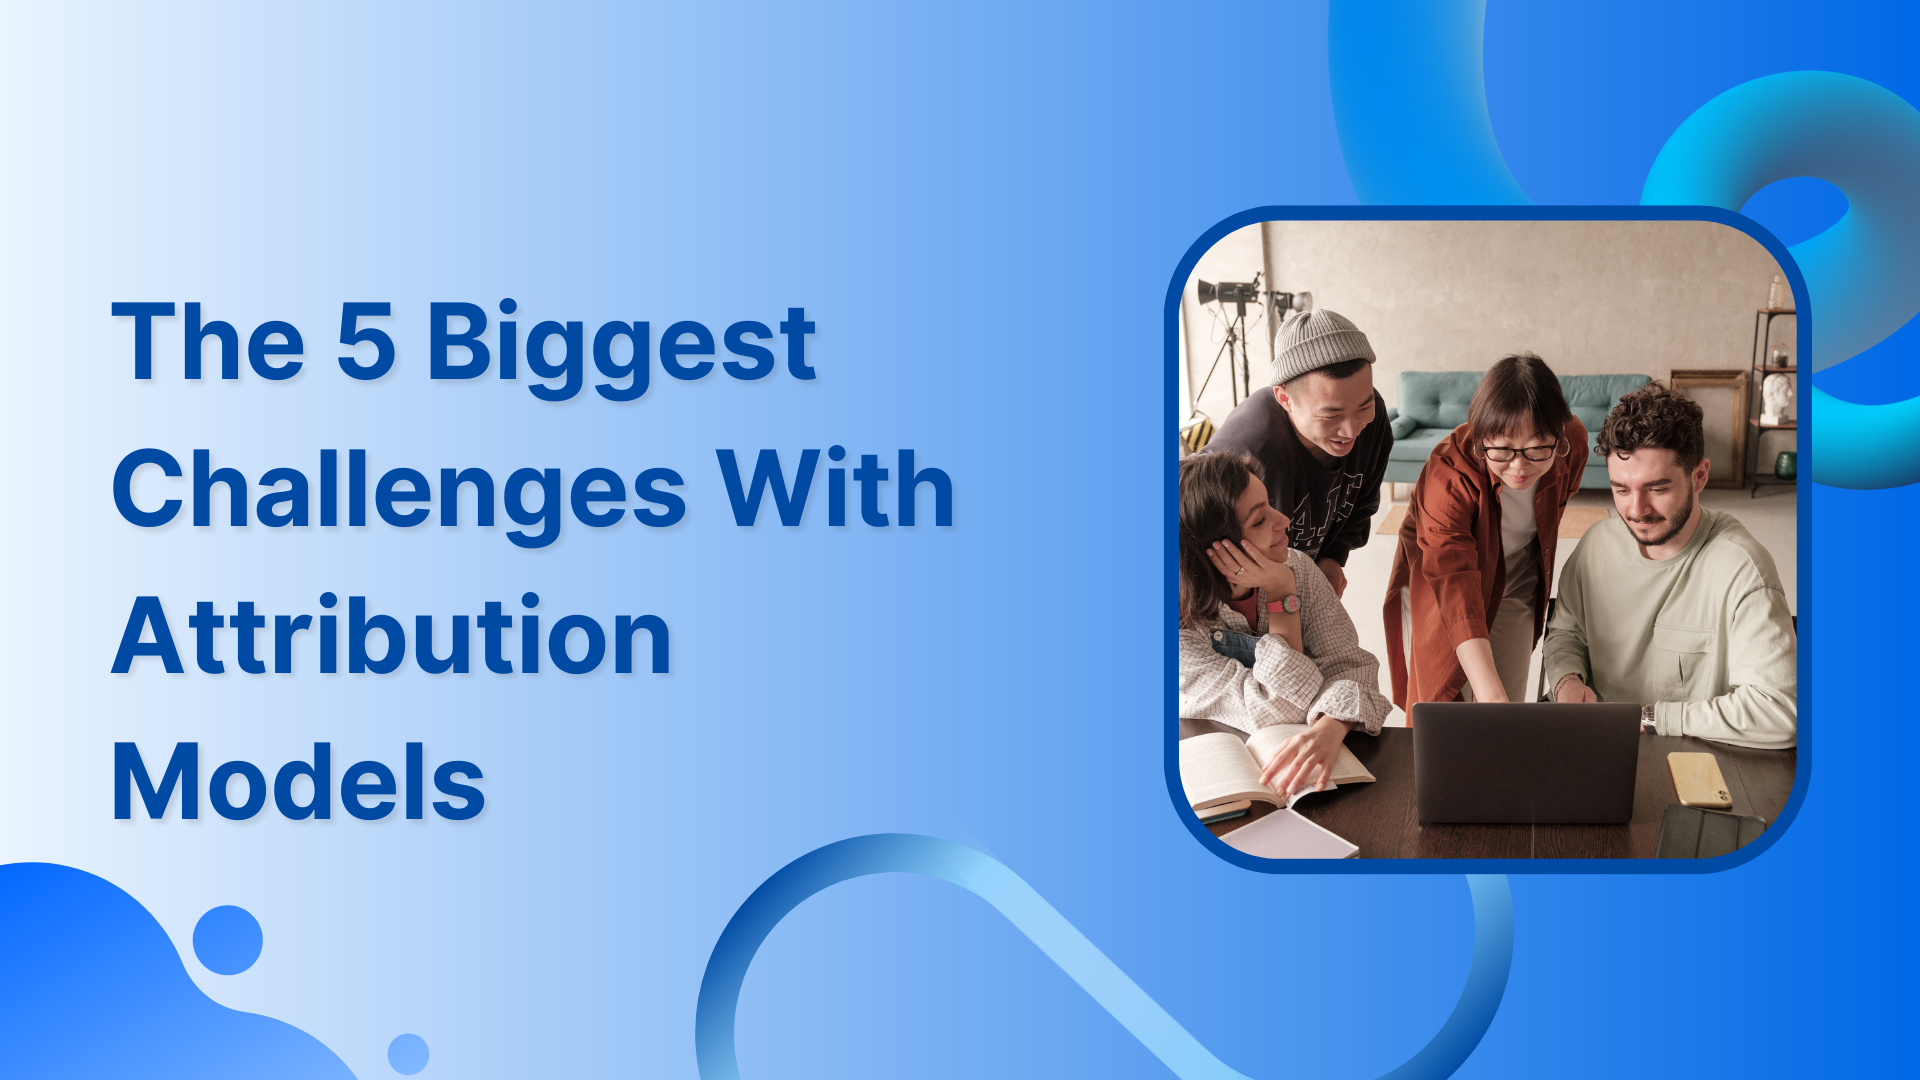 The 5 Biggest Challenges With Attribution Models